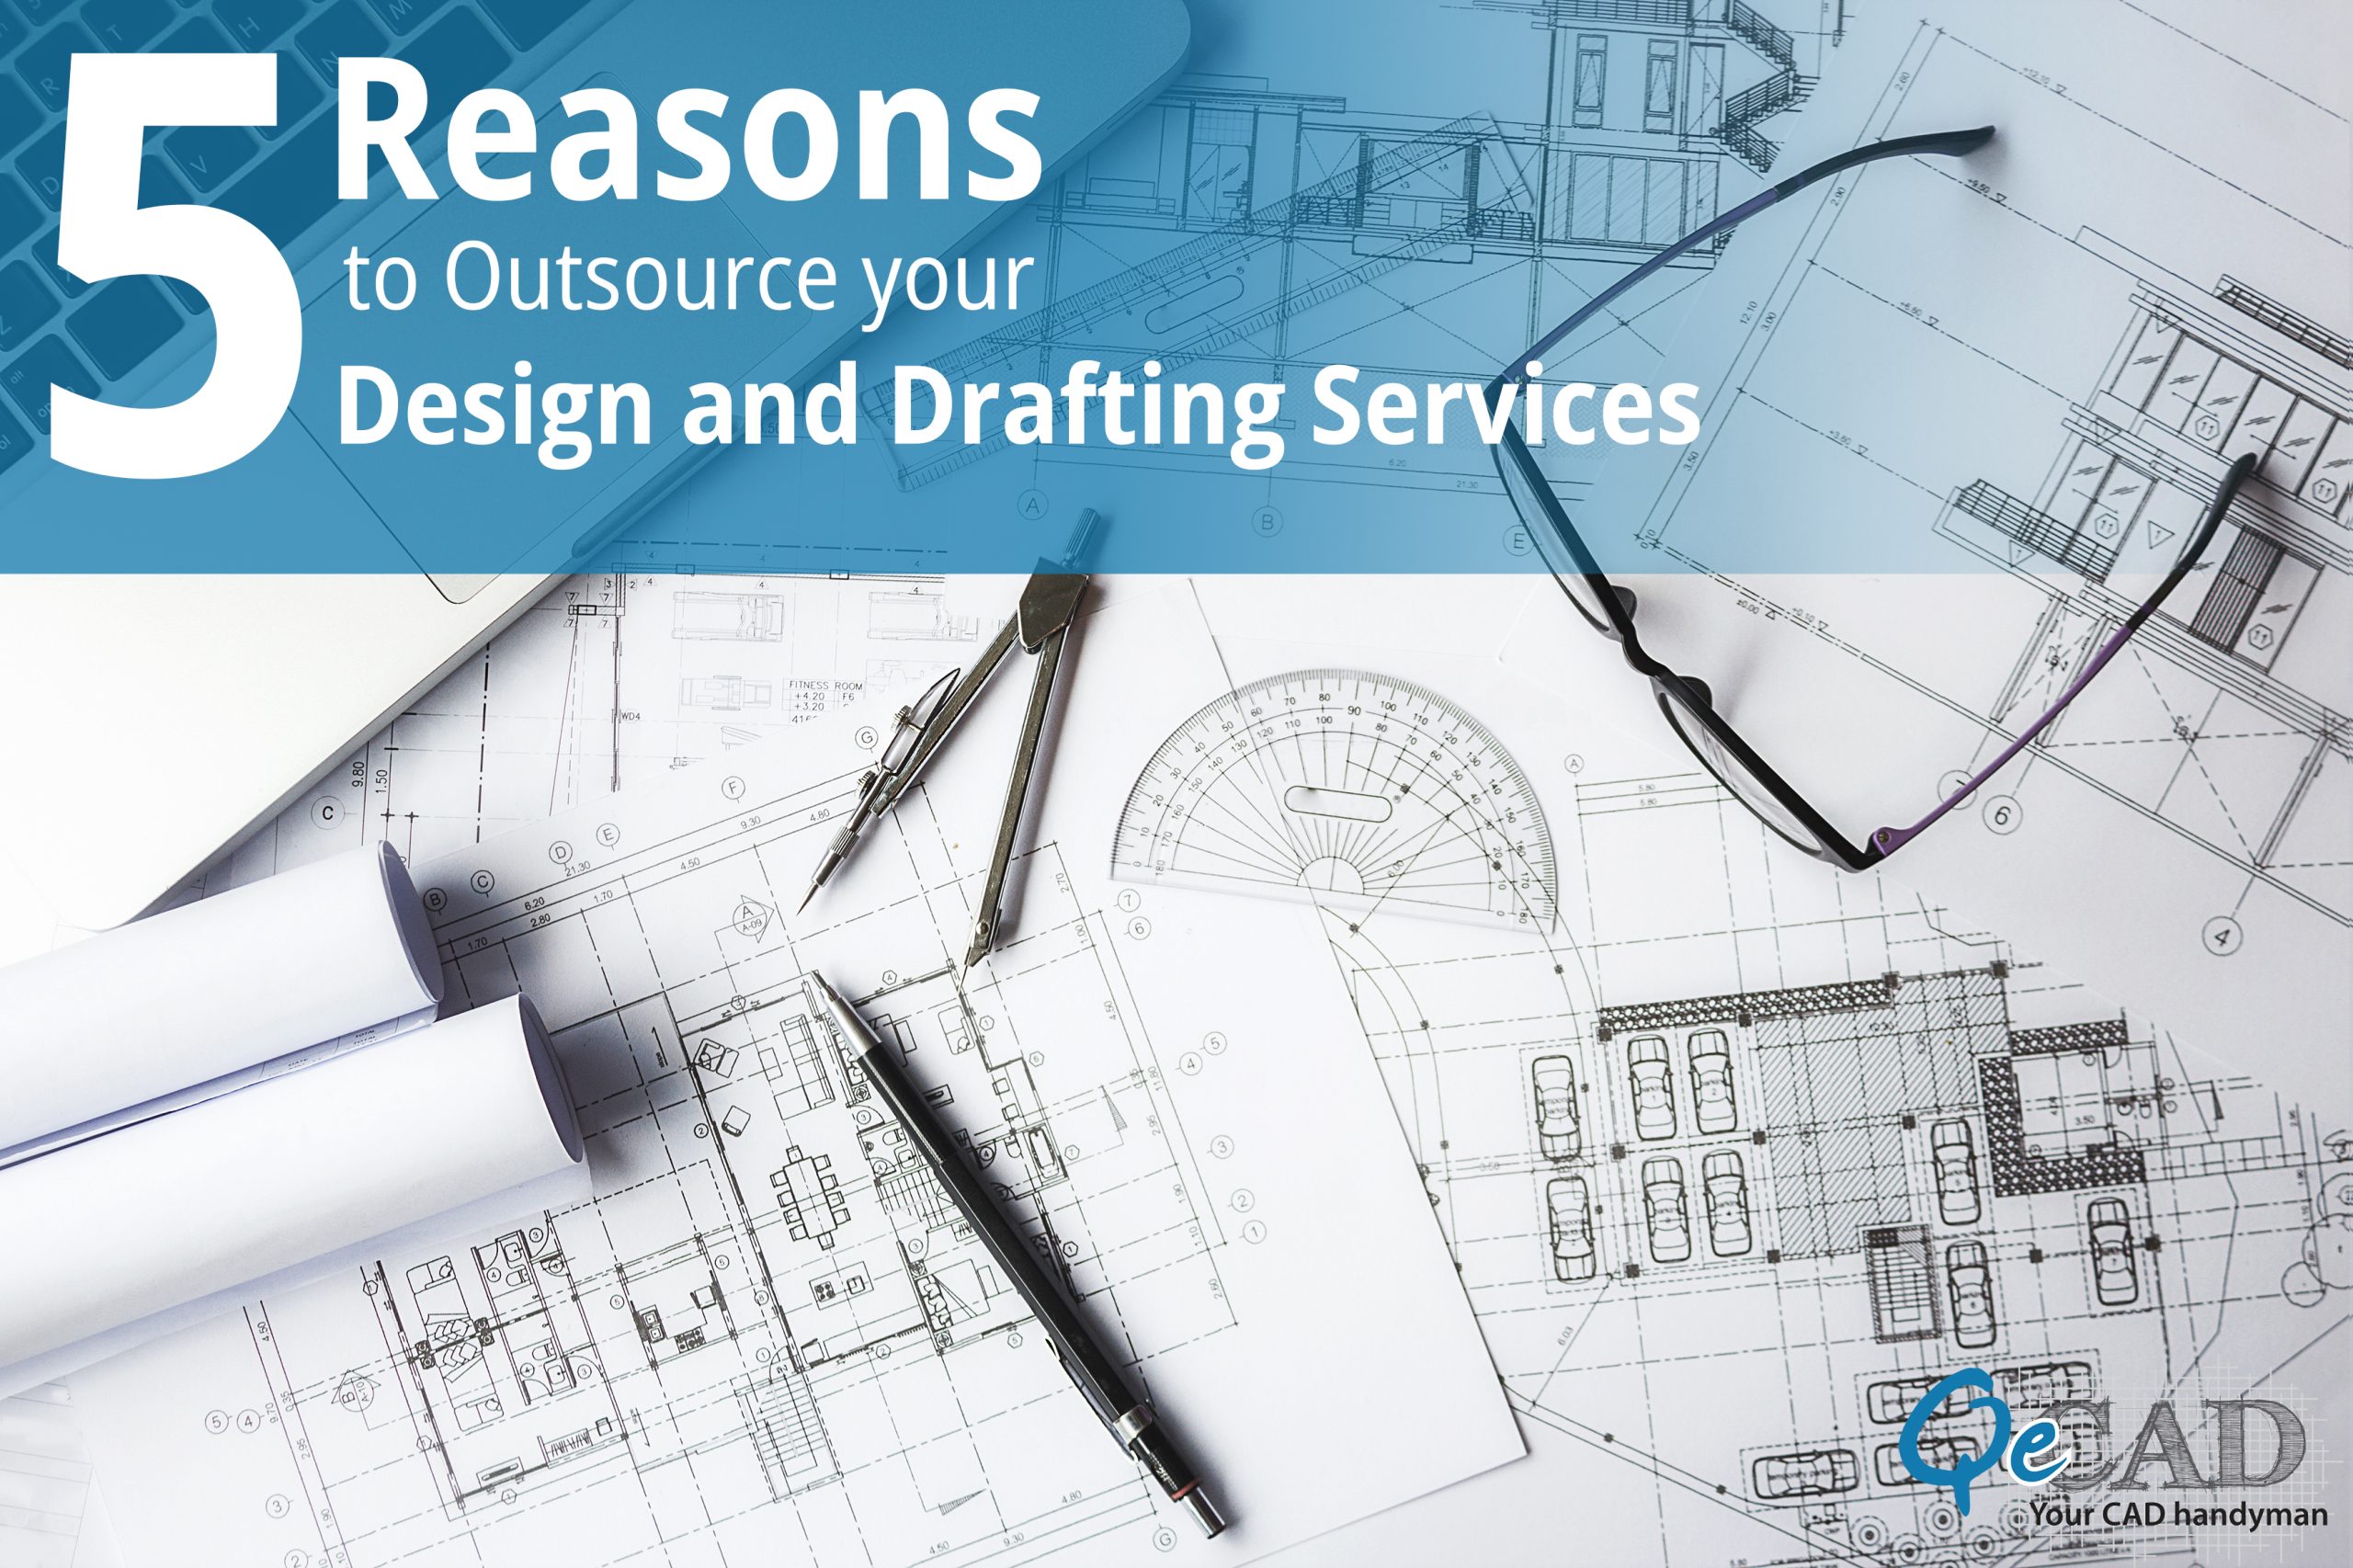 5 Reasons to Outsource your Design and Drafting Services